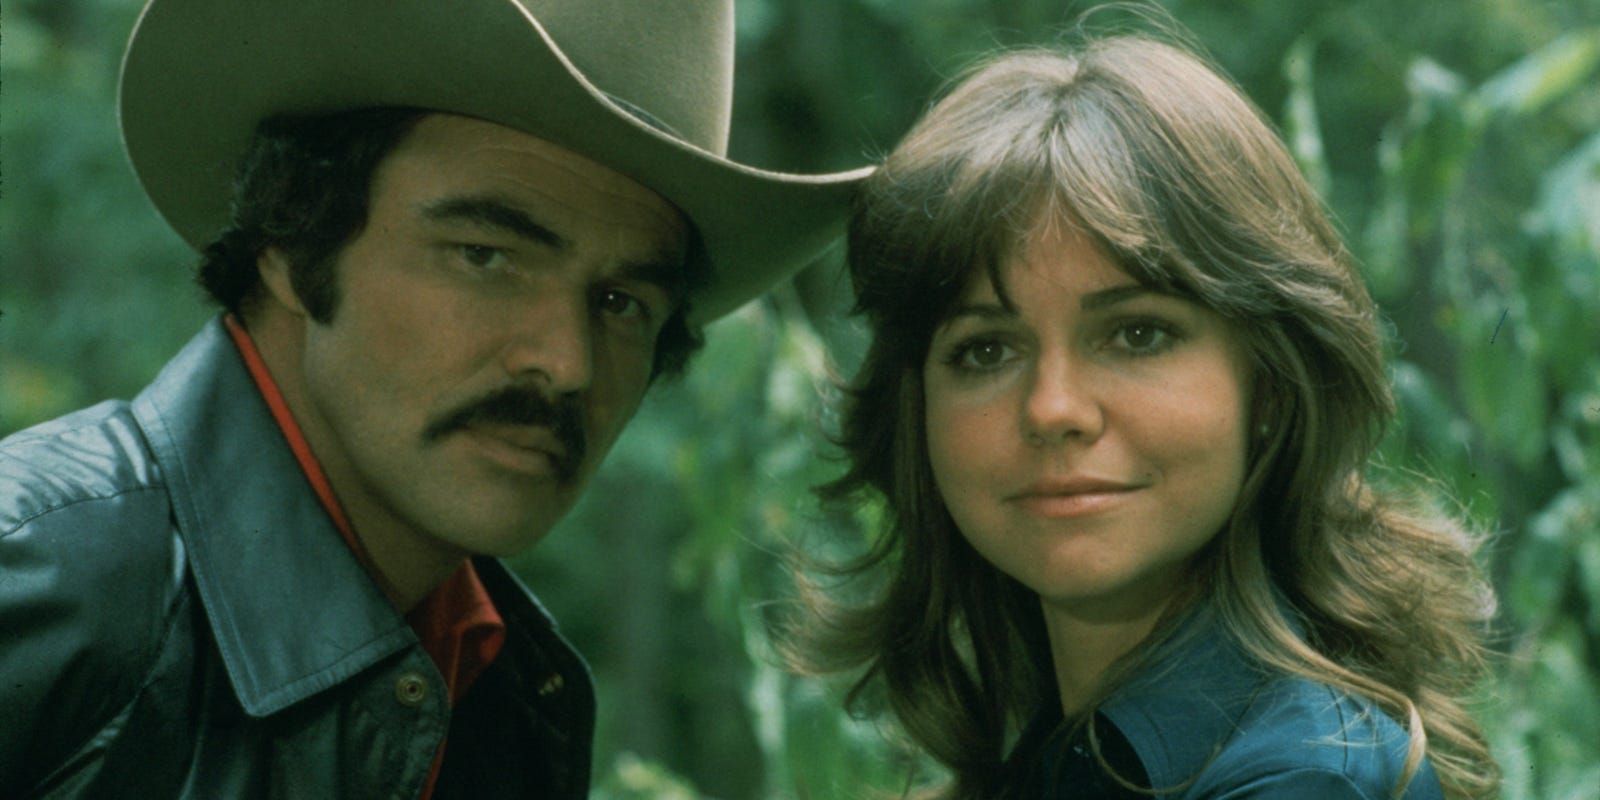 Burt Reynolds and Sally Fields in Smokey and the Bandit